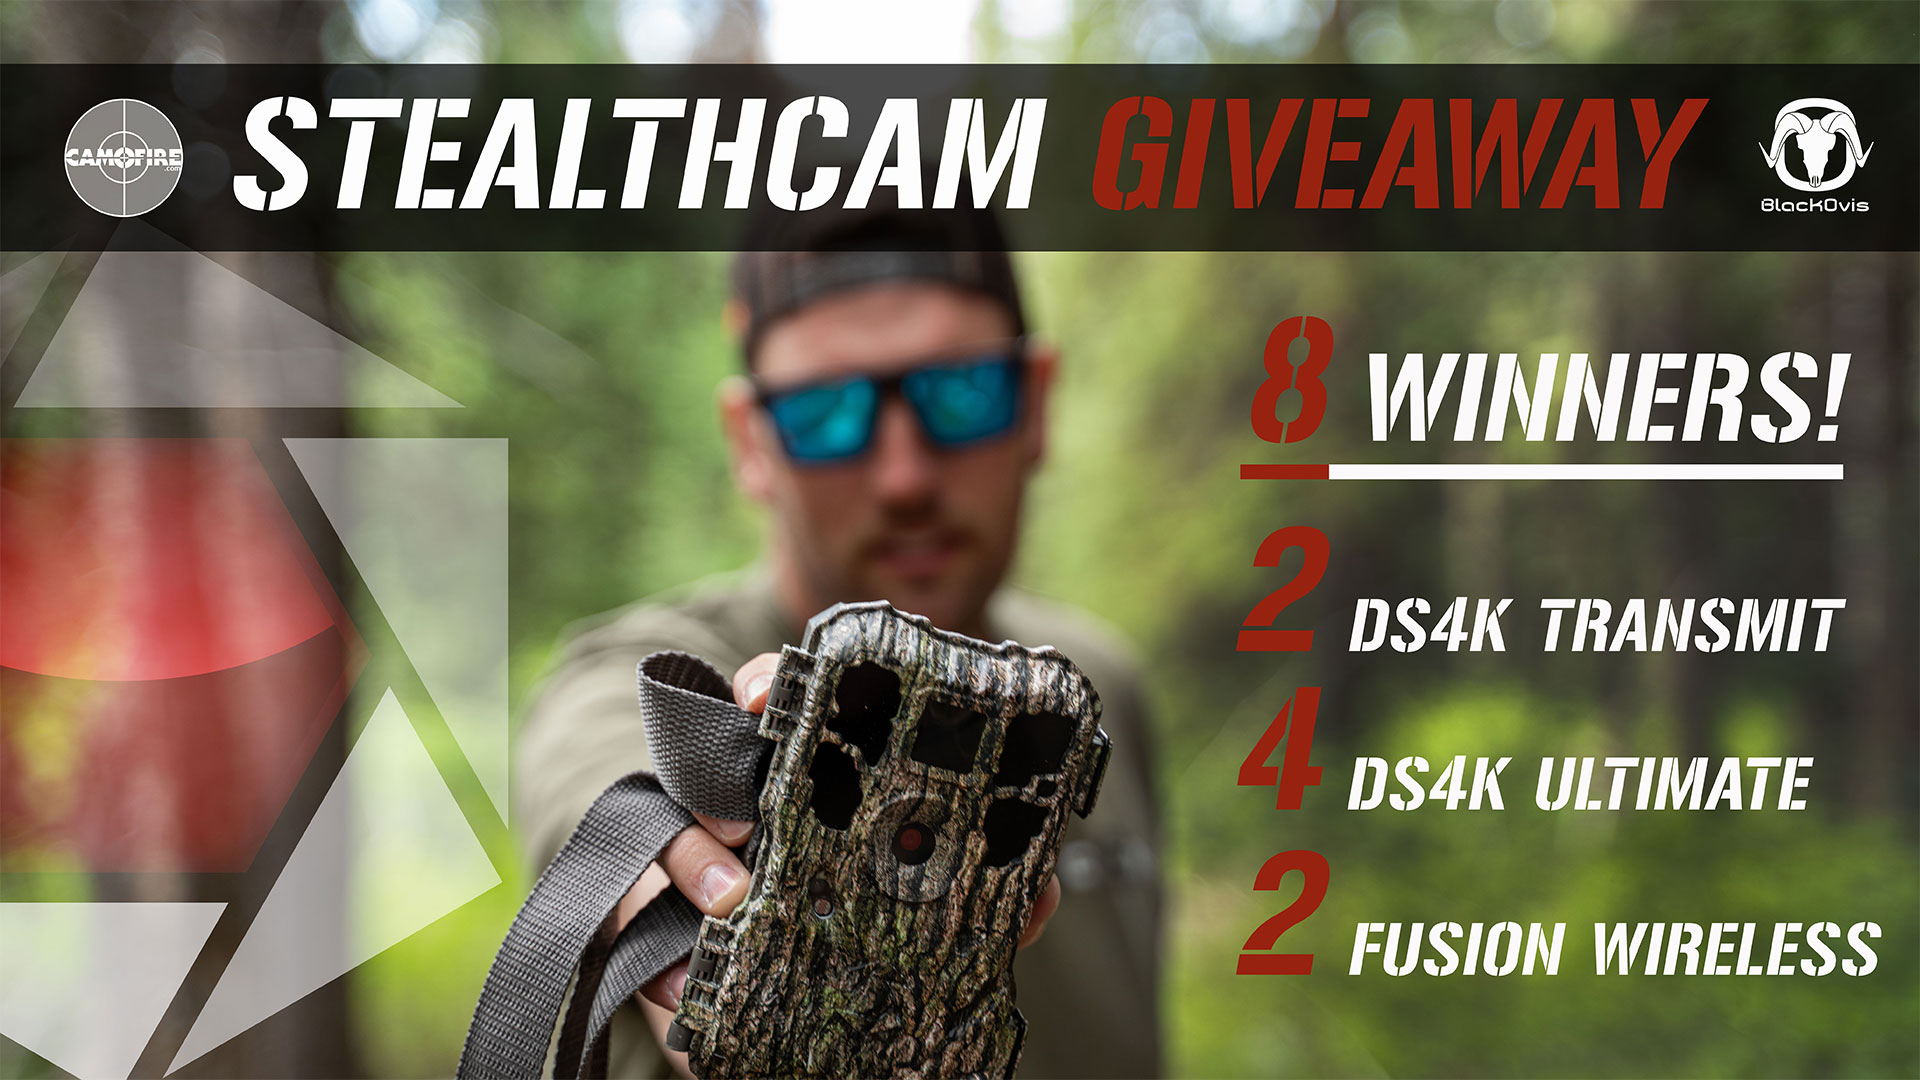 online contests, sweepstakes and giveaways - Stealthcam July Giveaway